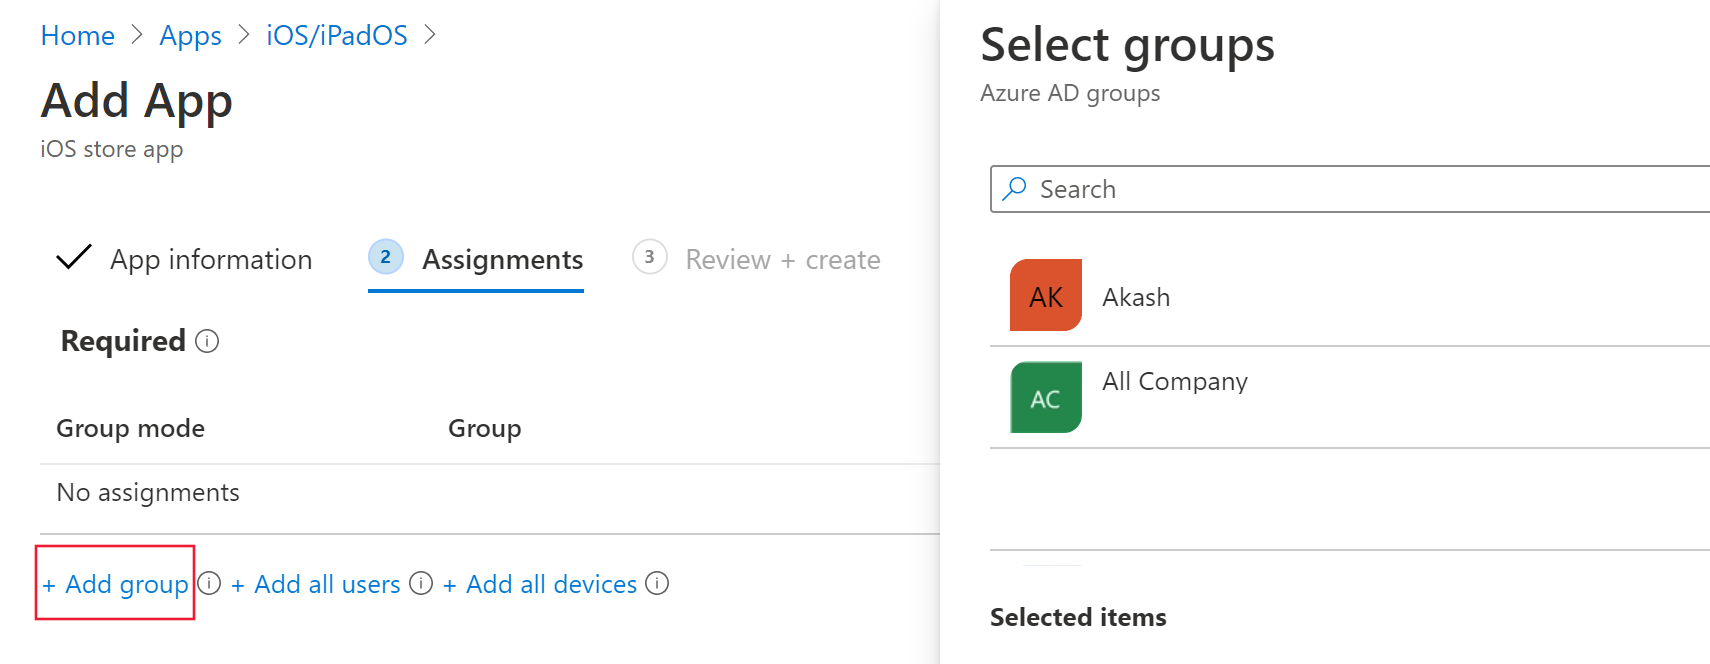 The Add group tab in the Microsoft Intune admin center